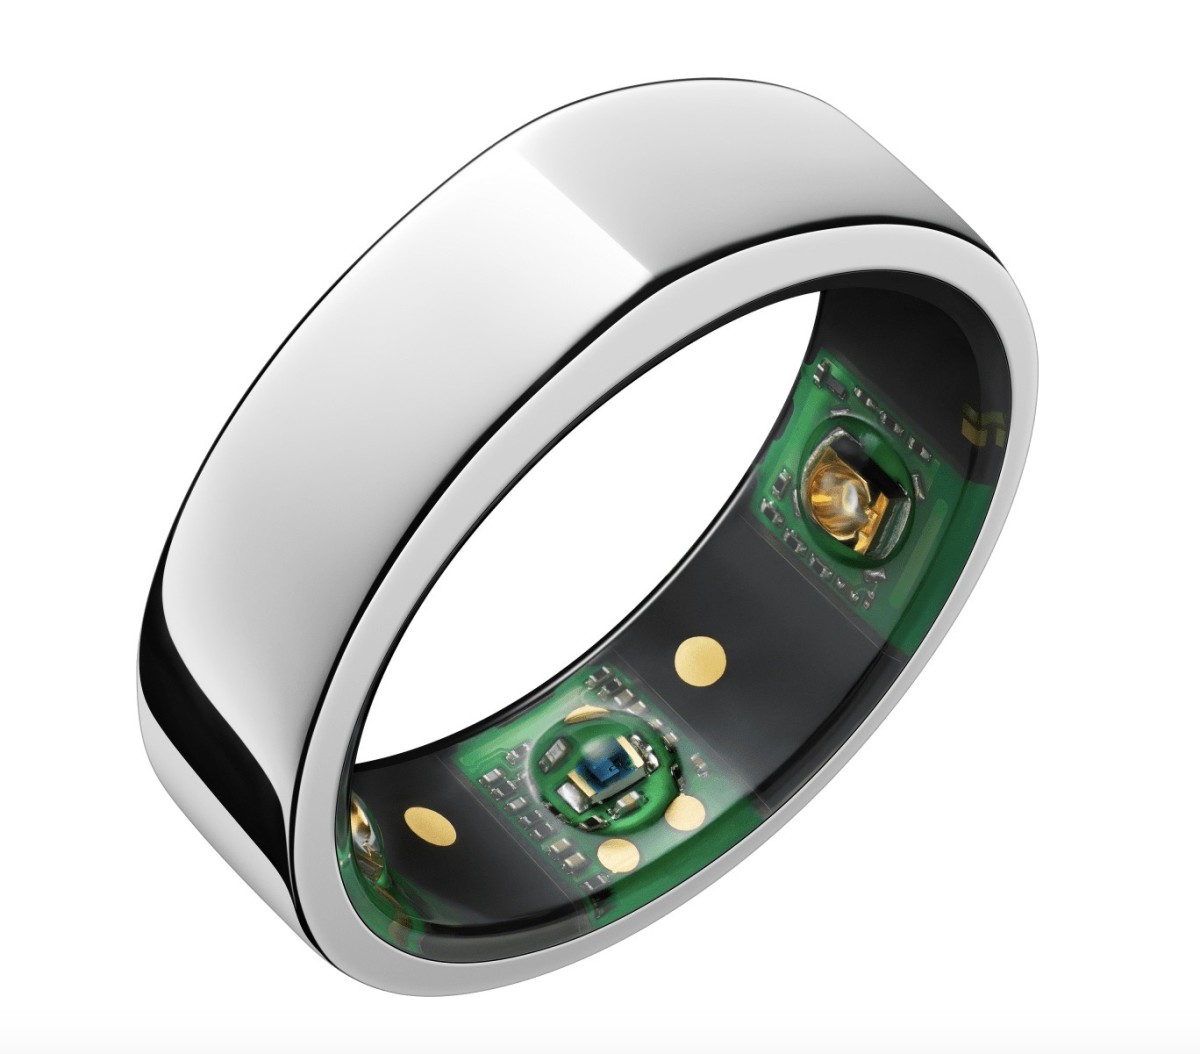 The Oura ring is designed by a Finnish company